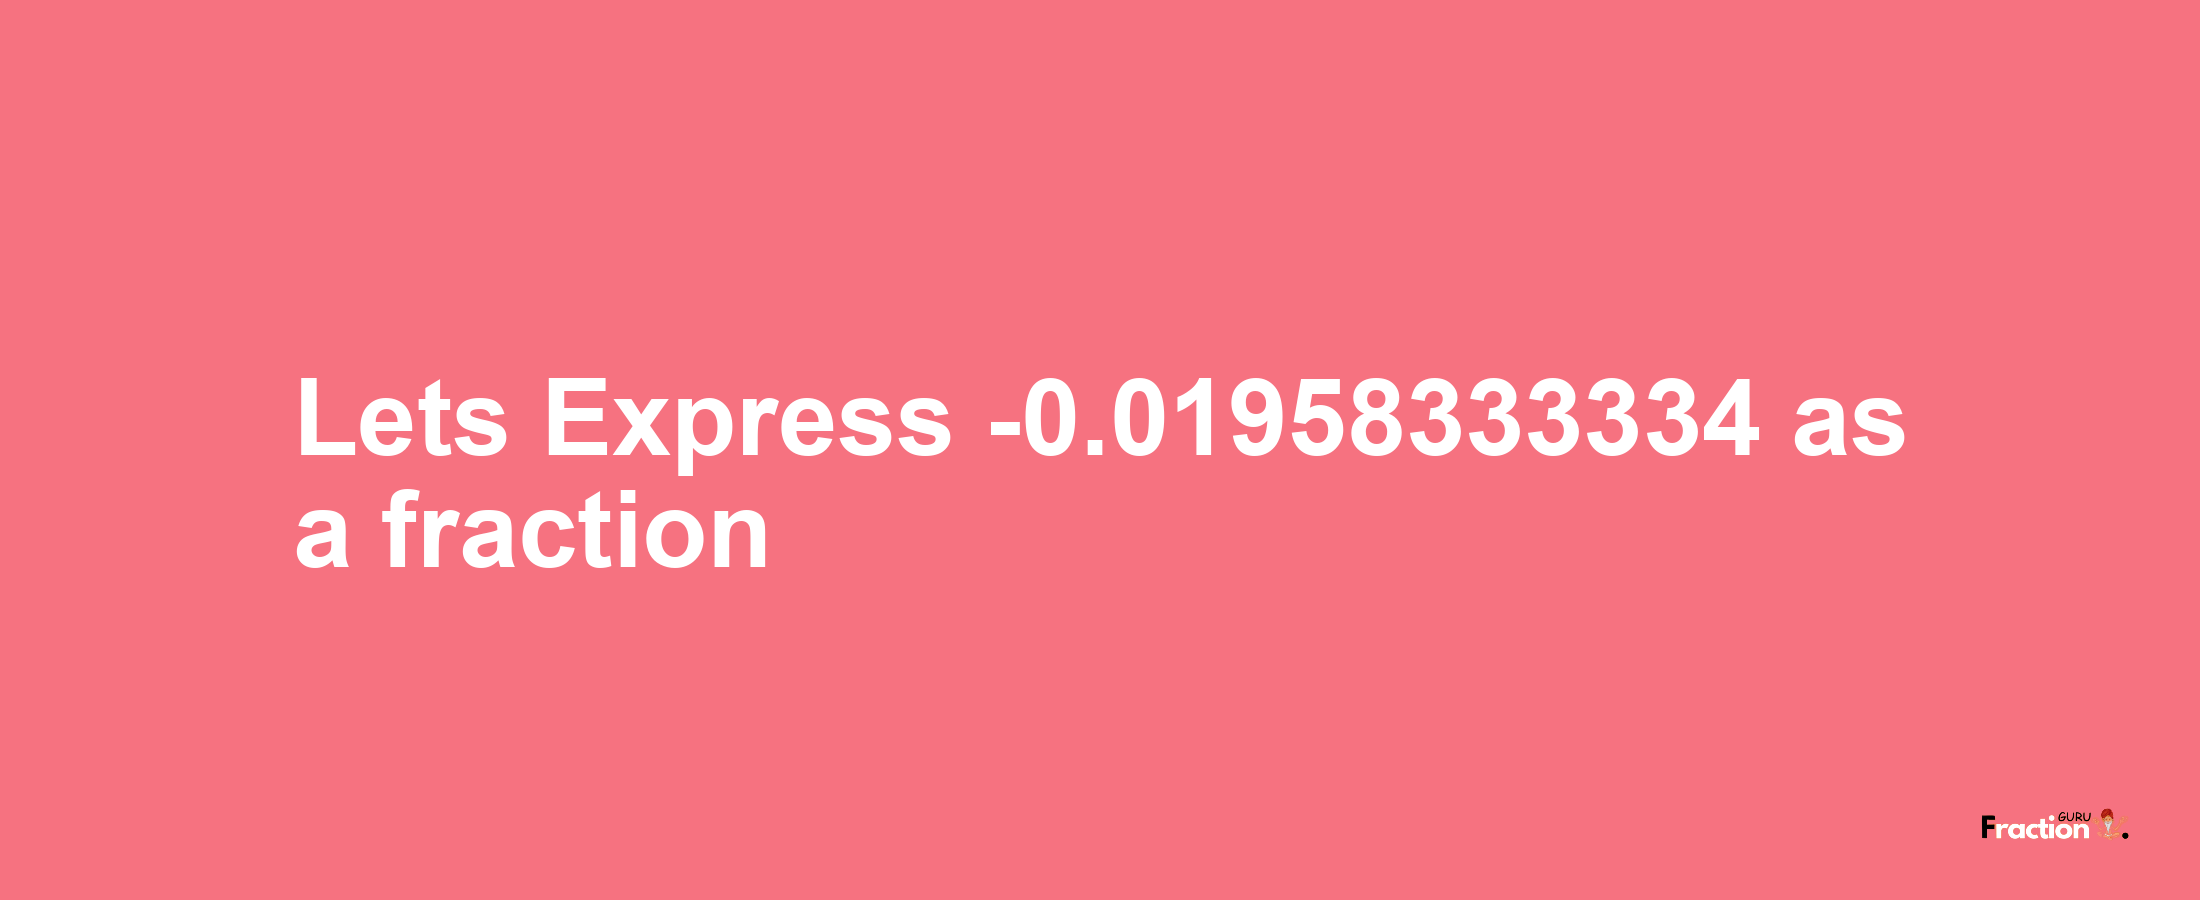 Lets Express -0.01958333334 as afraction